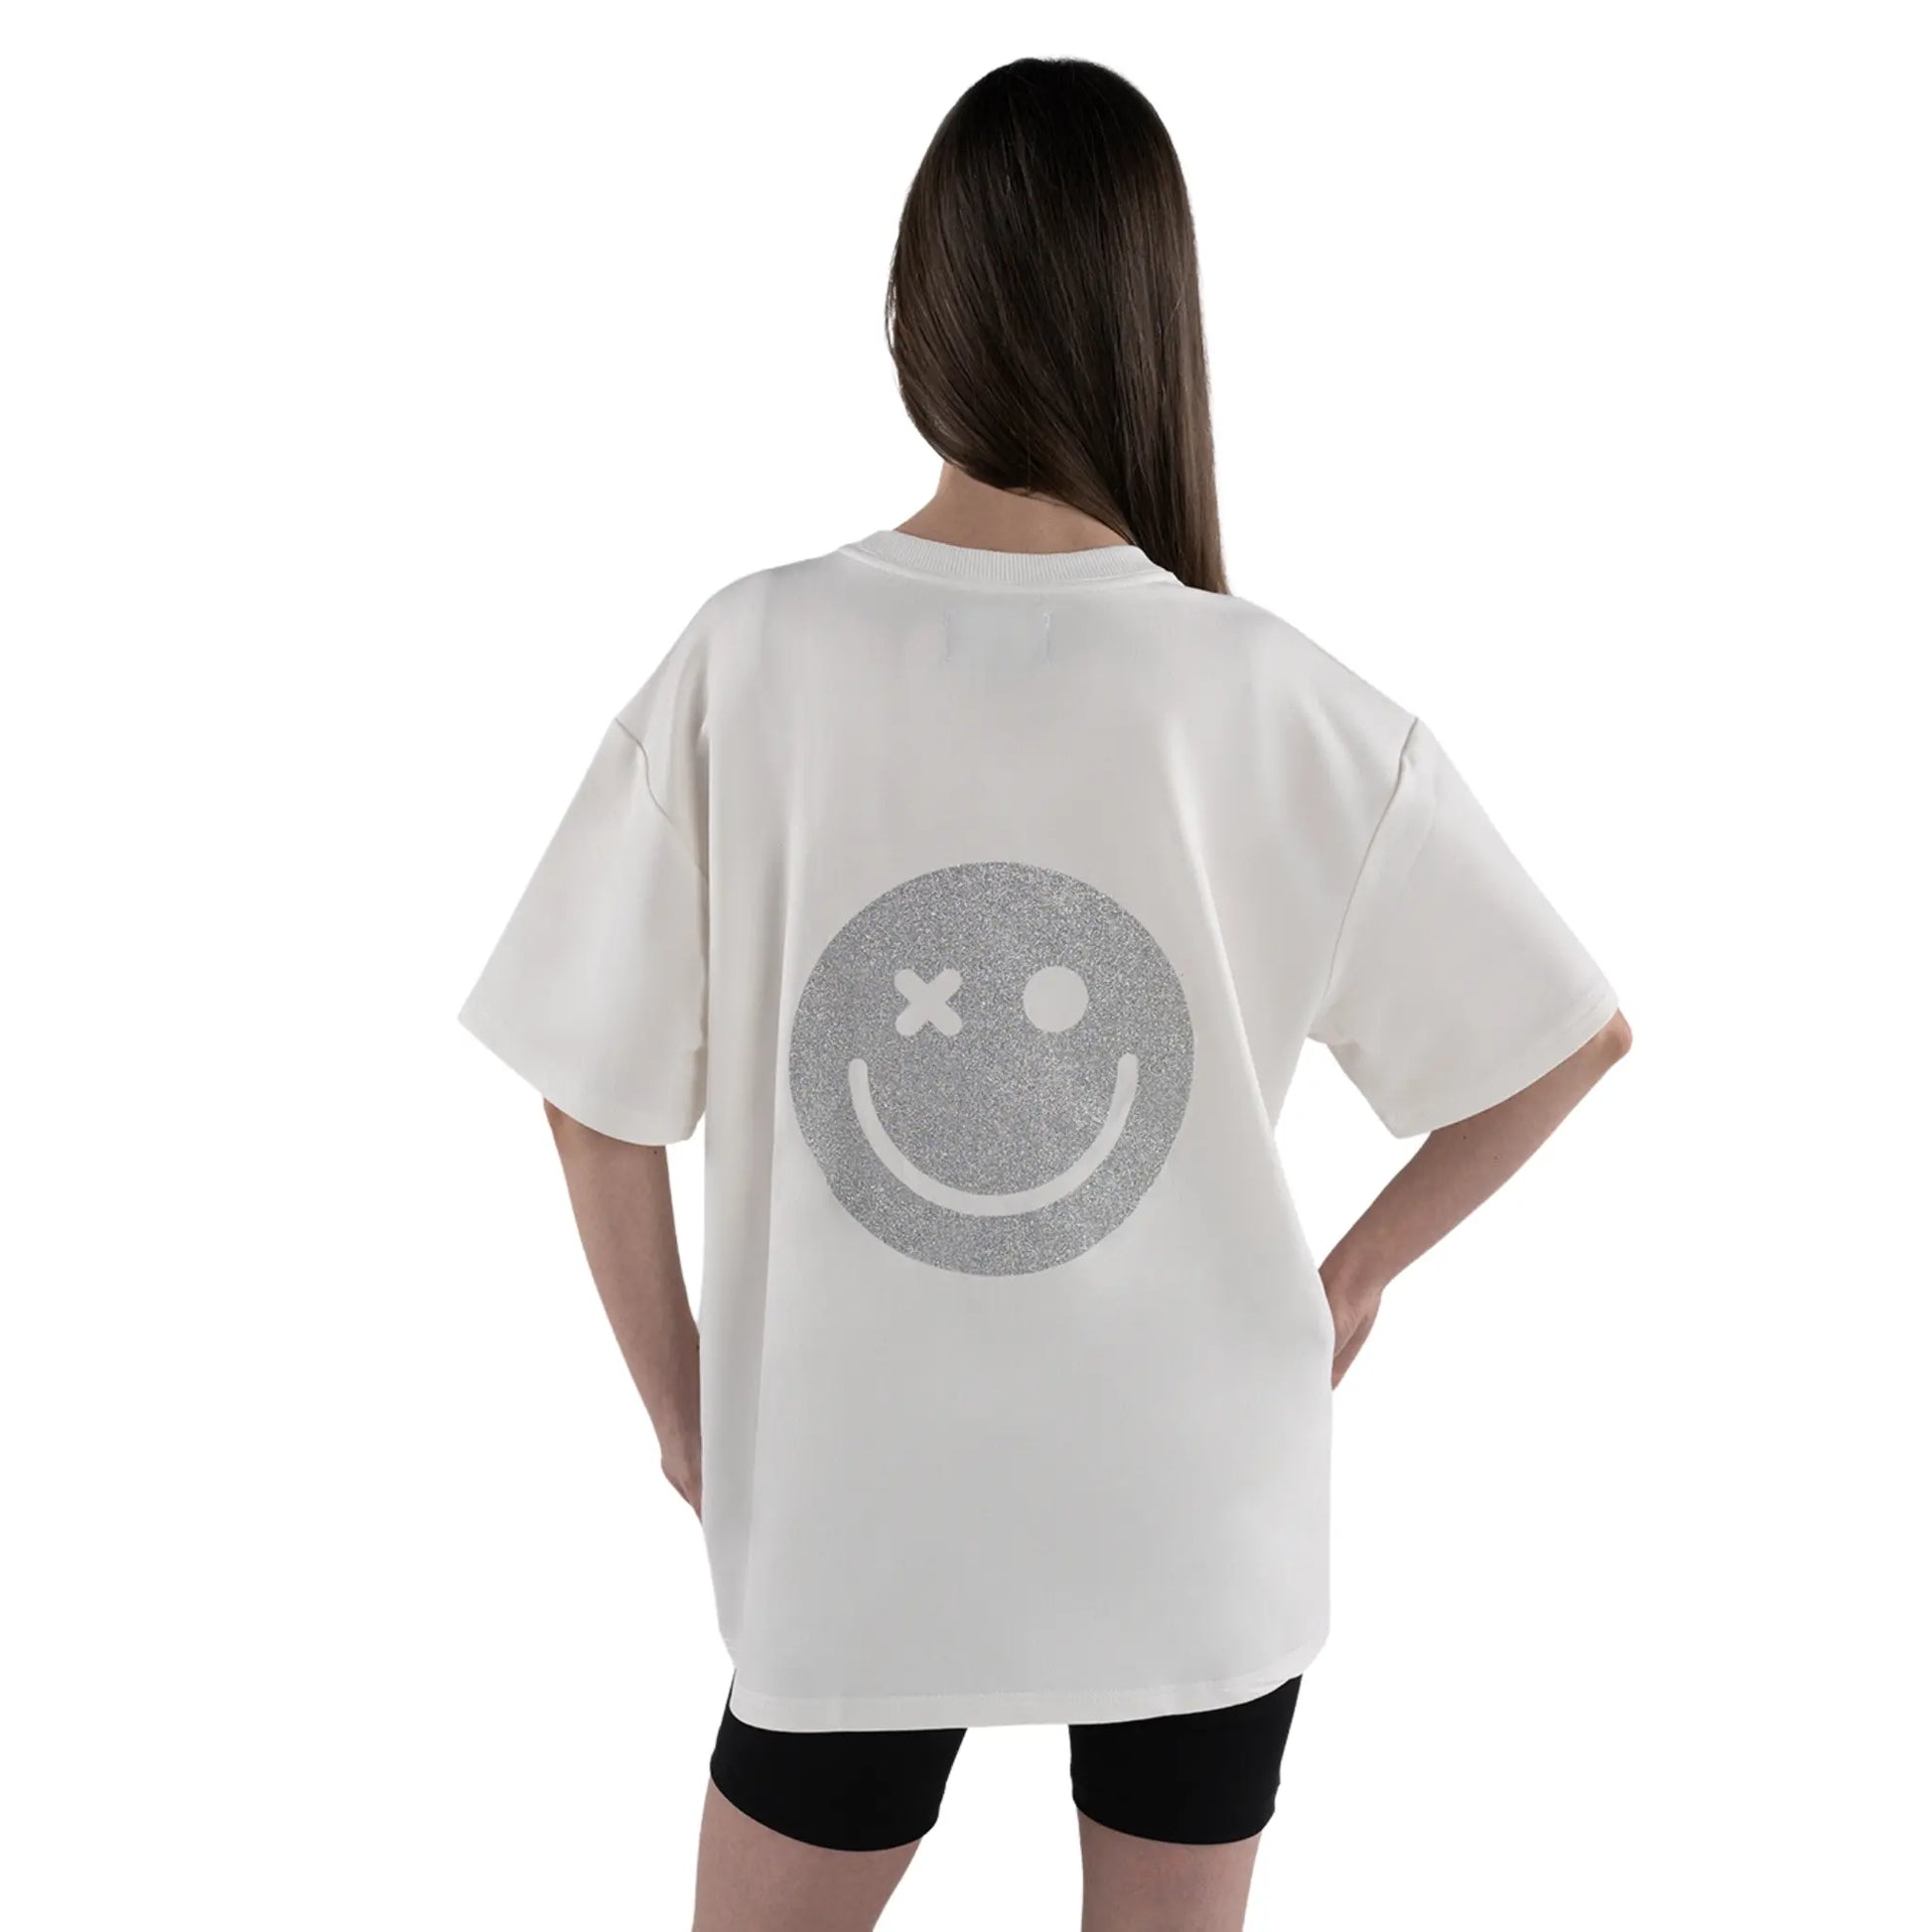 Glitter Smiley Oversized T-shirt White on brunette woman wearing shorts close up view on back logo